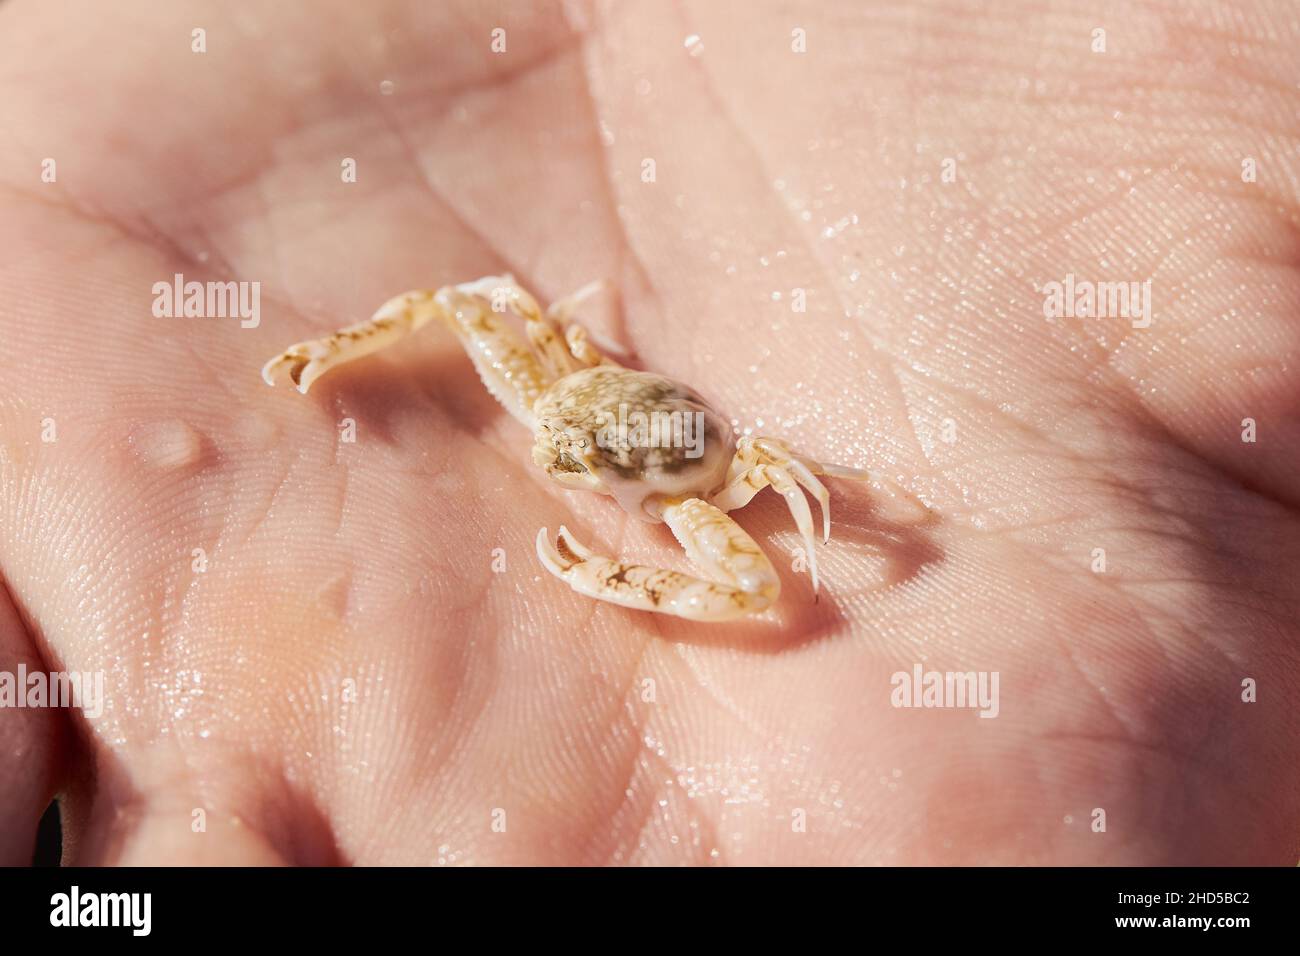 Tiny  opilio crab in the hand close up. Chionoecetes opilio Stock Photo